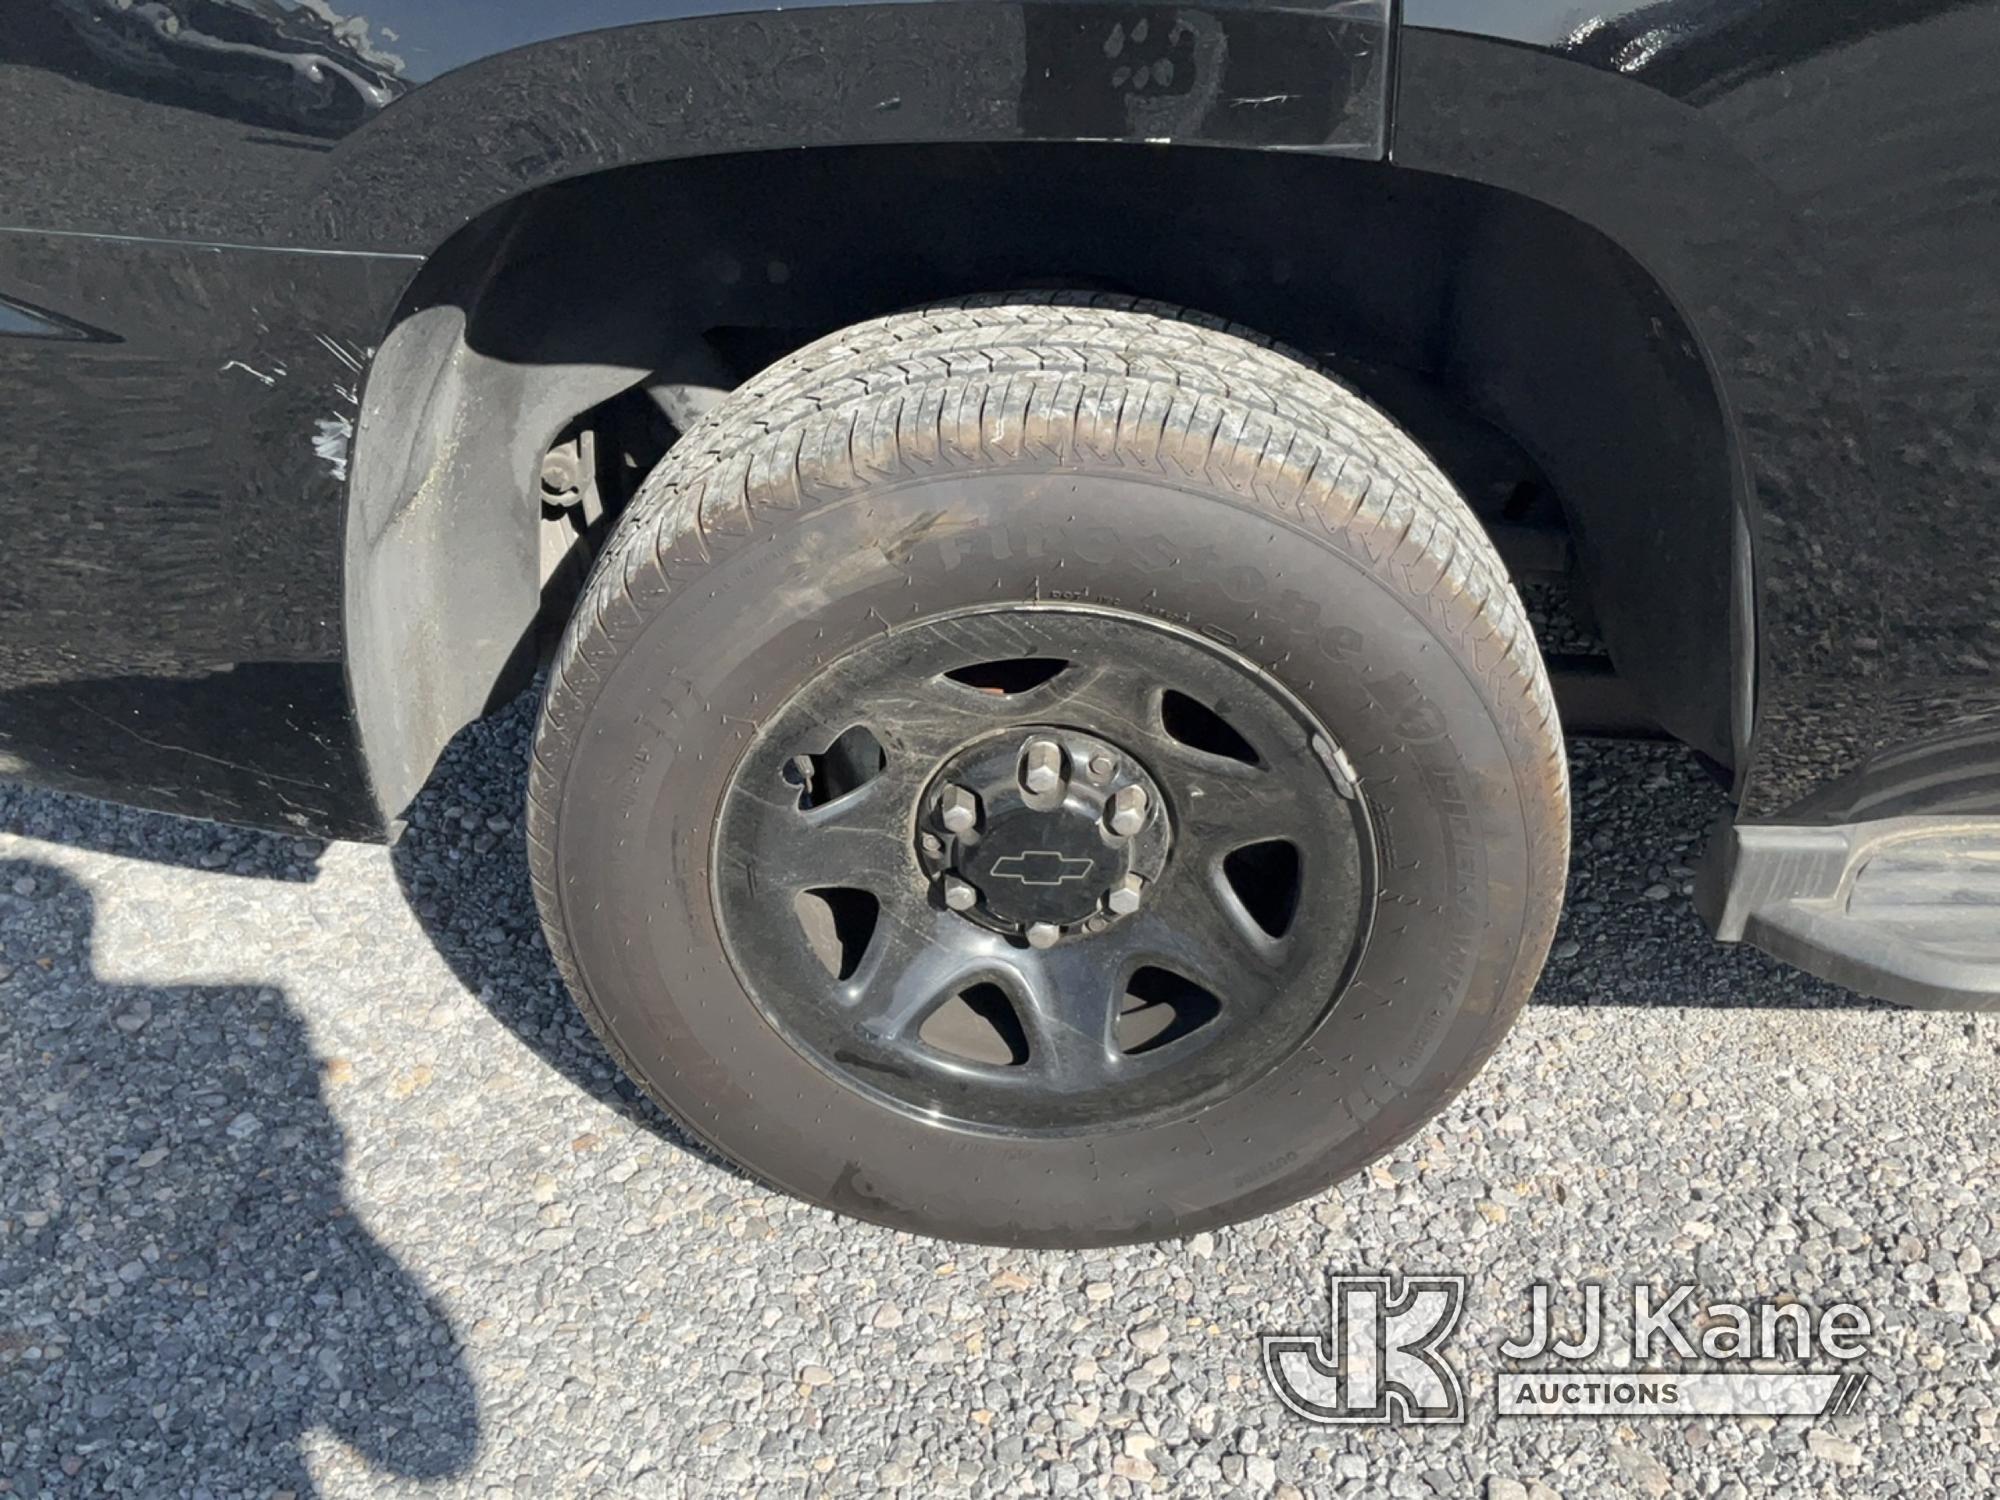 (Las Vegas, NV) 2016 Chevrolet Tahoe Police Package Towed In, No Console, Rear Seats Unsecured Check